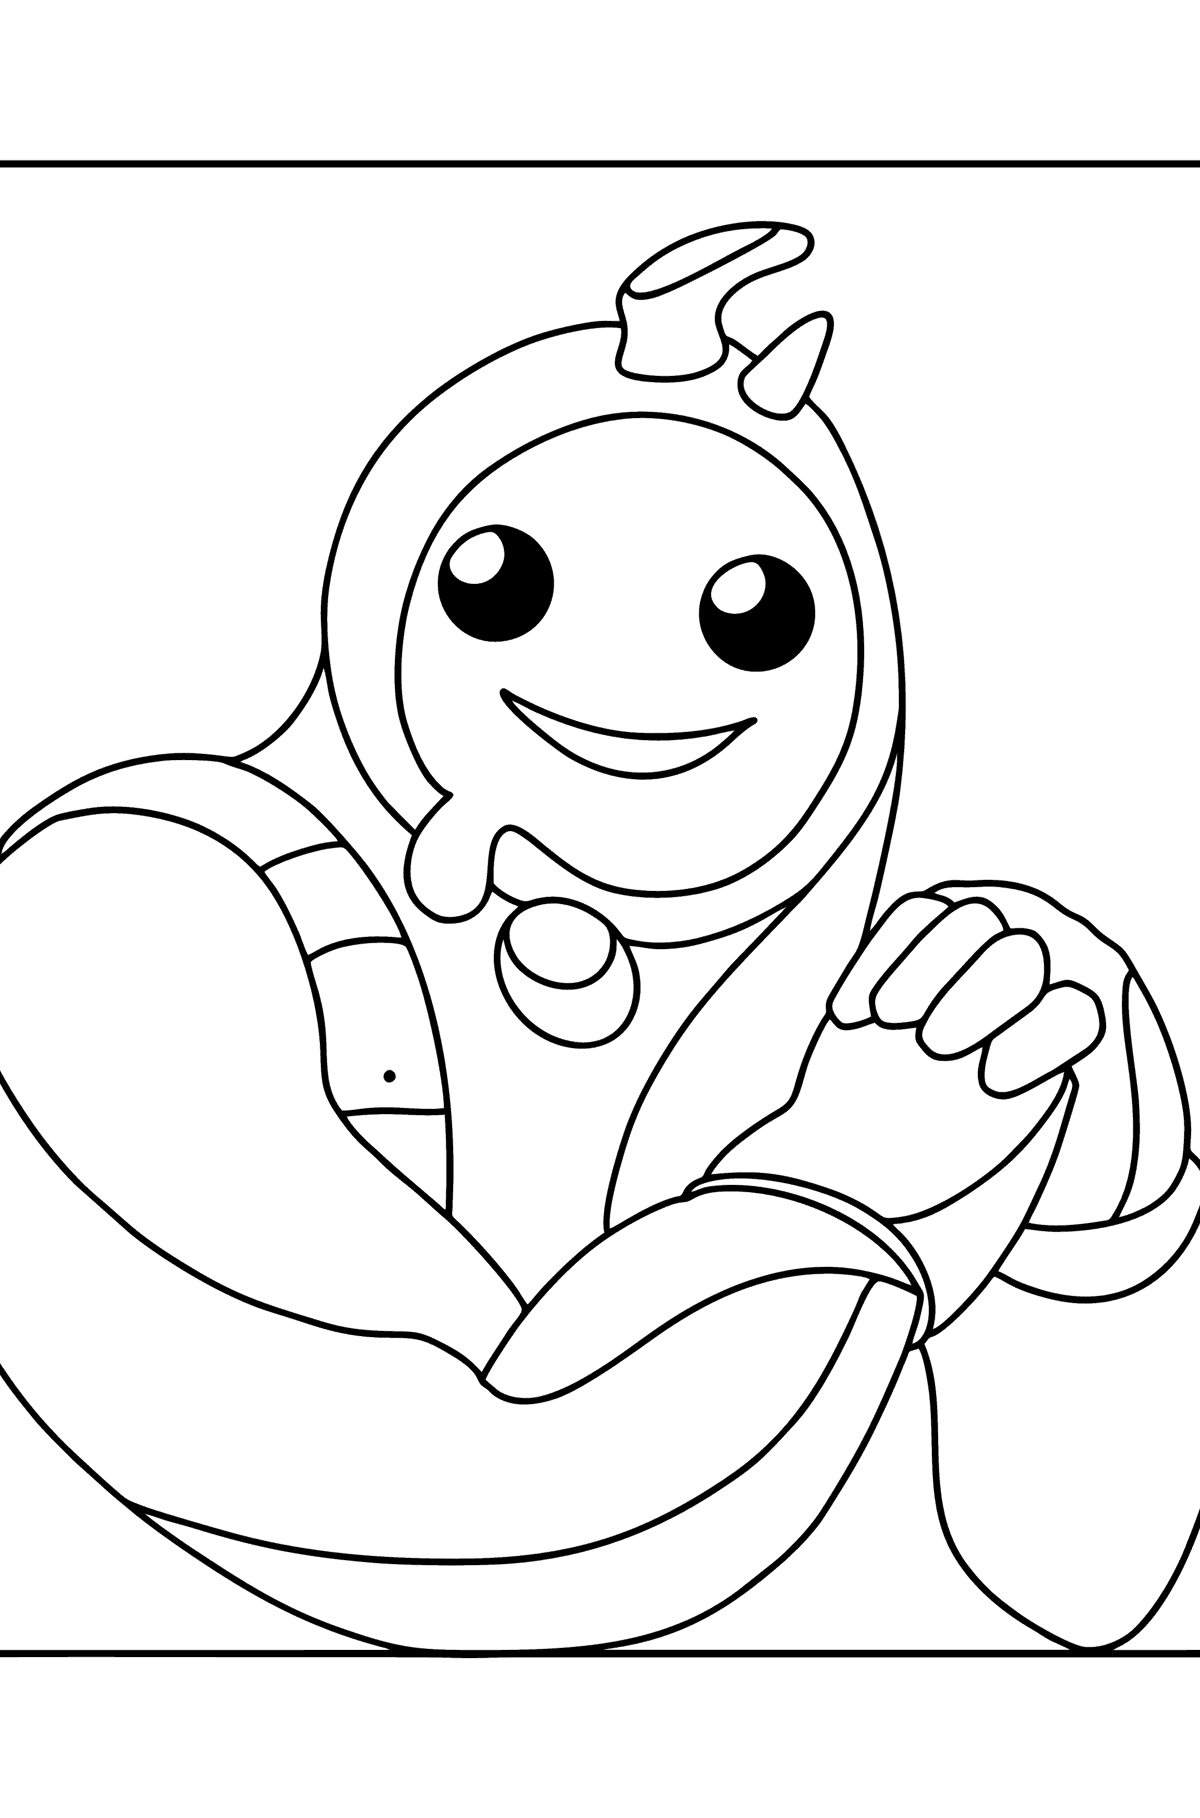 Fortnite Rippley coloring page - Coloring Pages for Kids